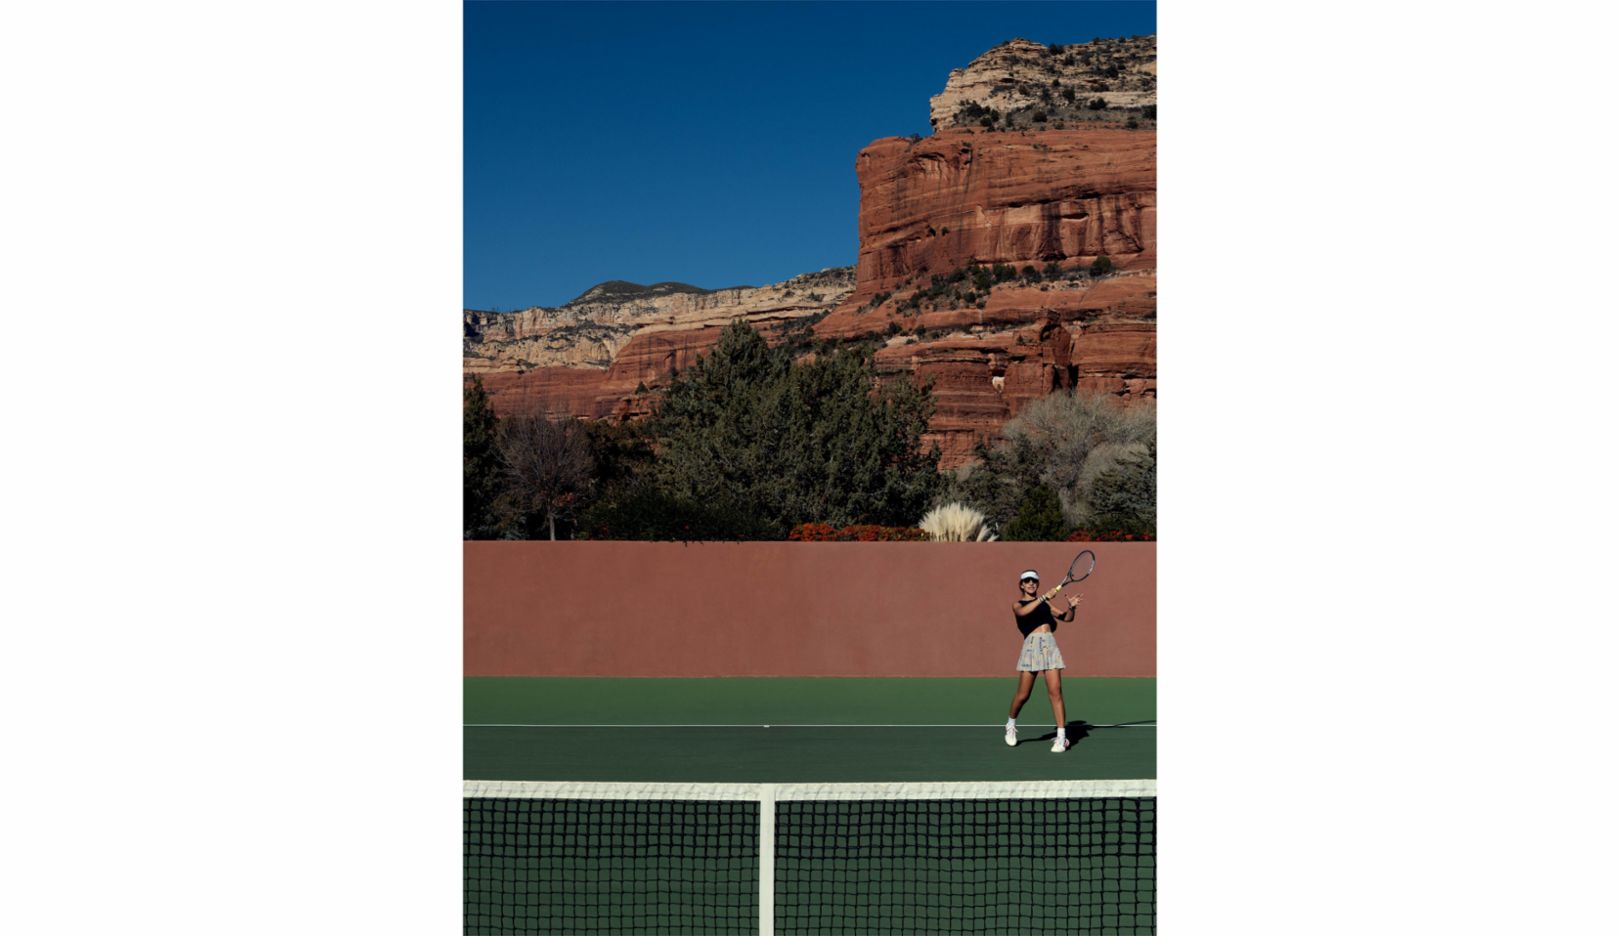 It’s no wonder that professional tennis players like Olympic champion and nine-time Grand Slam winner Bethanie Mattek-Sands practices here. In the red rocks of Sedona, they find the peace and quiet they longed for on the hectic tennis tour. “This court in Arizona is a spiritual place,” says Radka Leitmeritz. “You can feel a lot of energy in Sedona. The cliffs are amazing. The way the stars sparkle at night is indescribably beautiful.” 